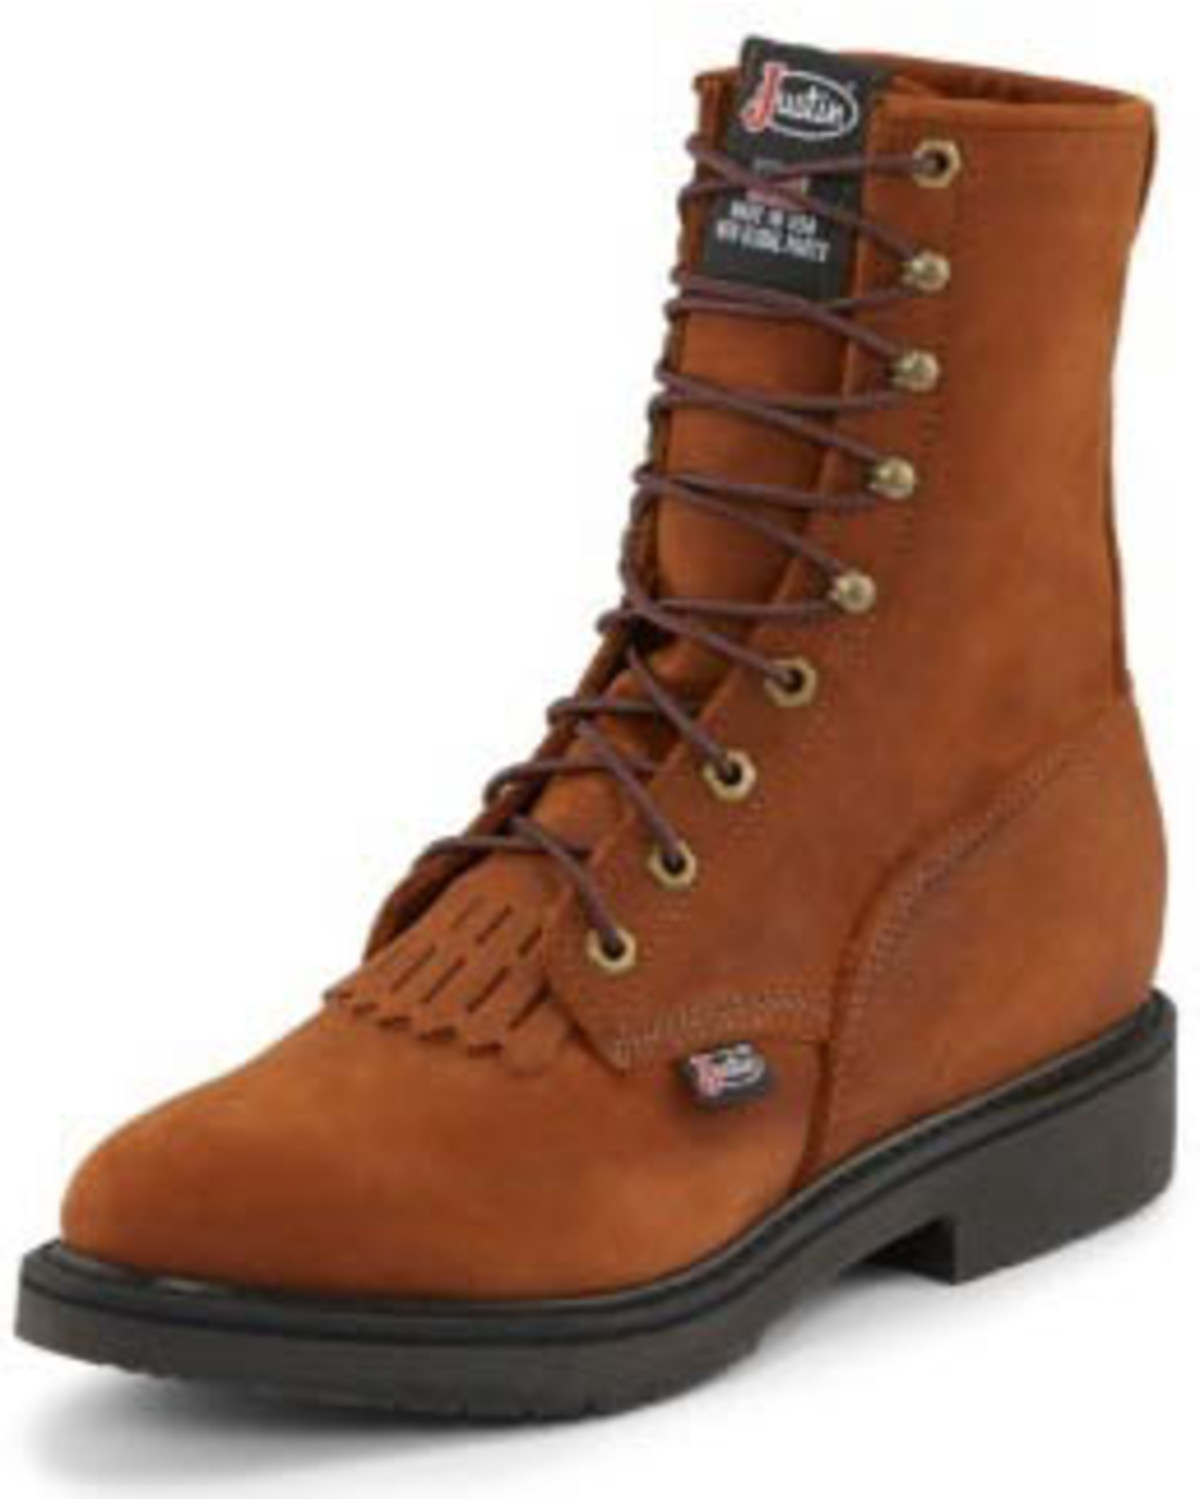 Justin Men's Lace Up Work Boots